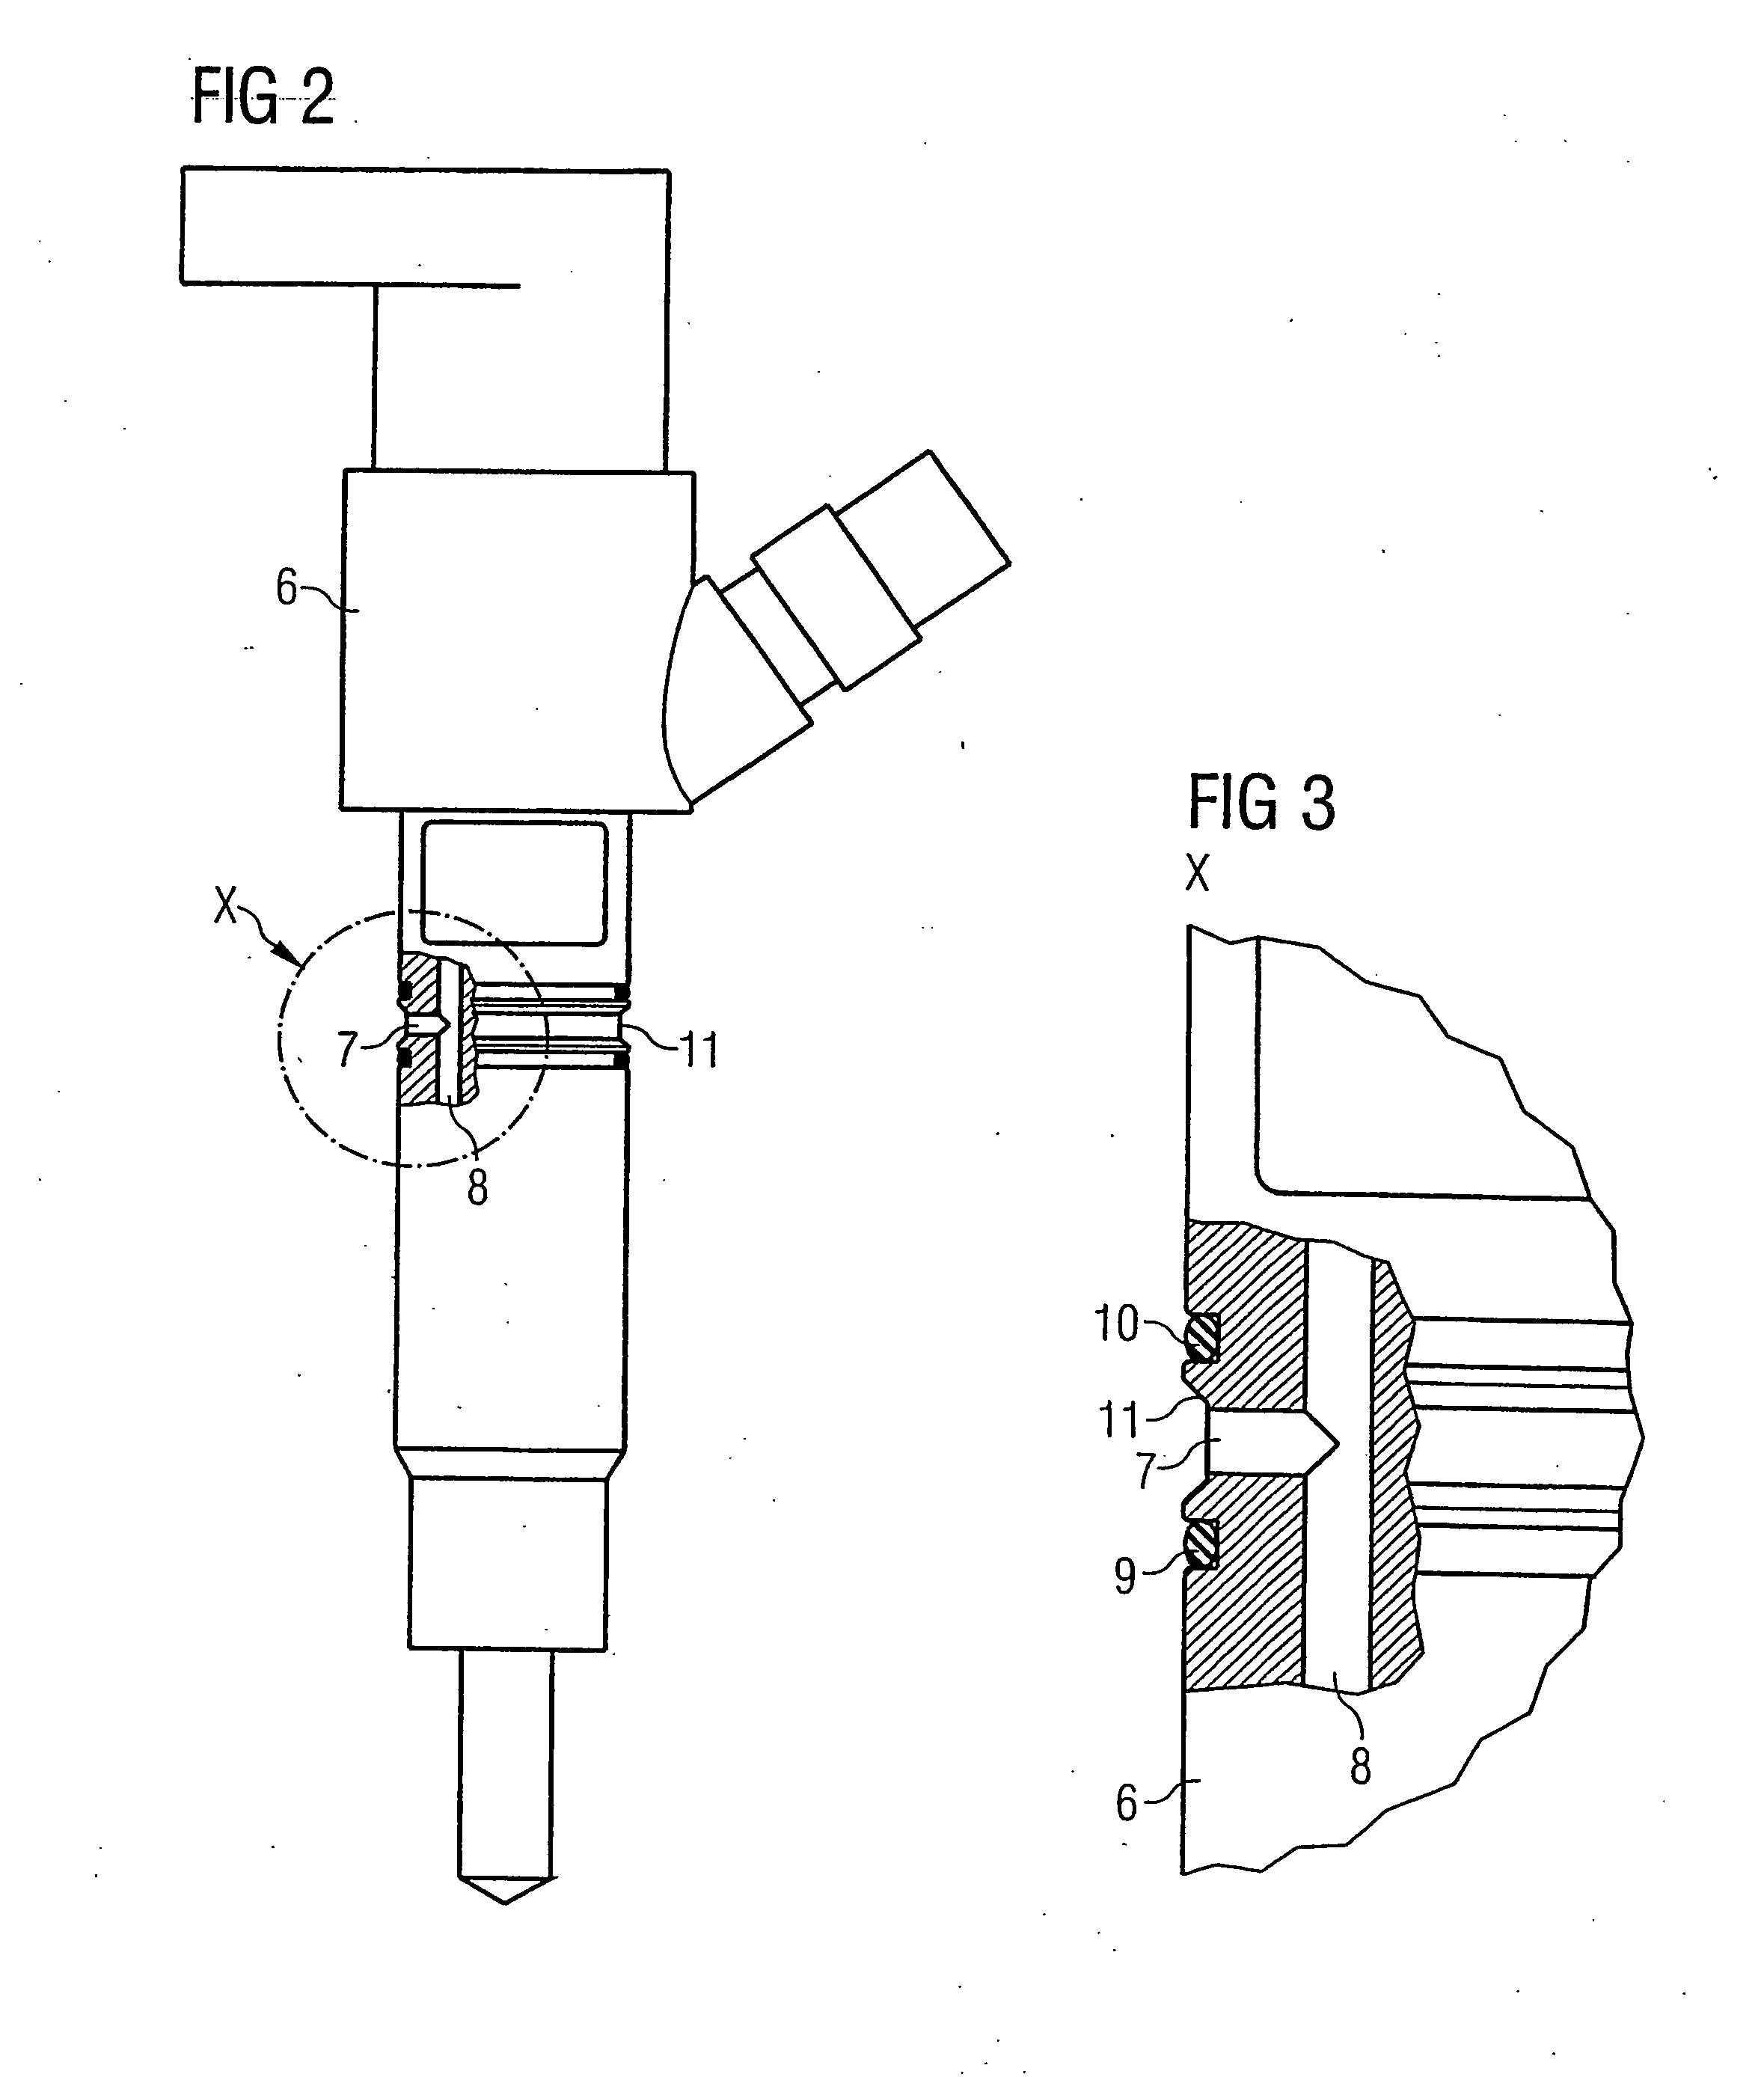 Leakage connection for a fuel injector